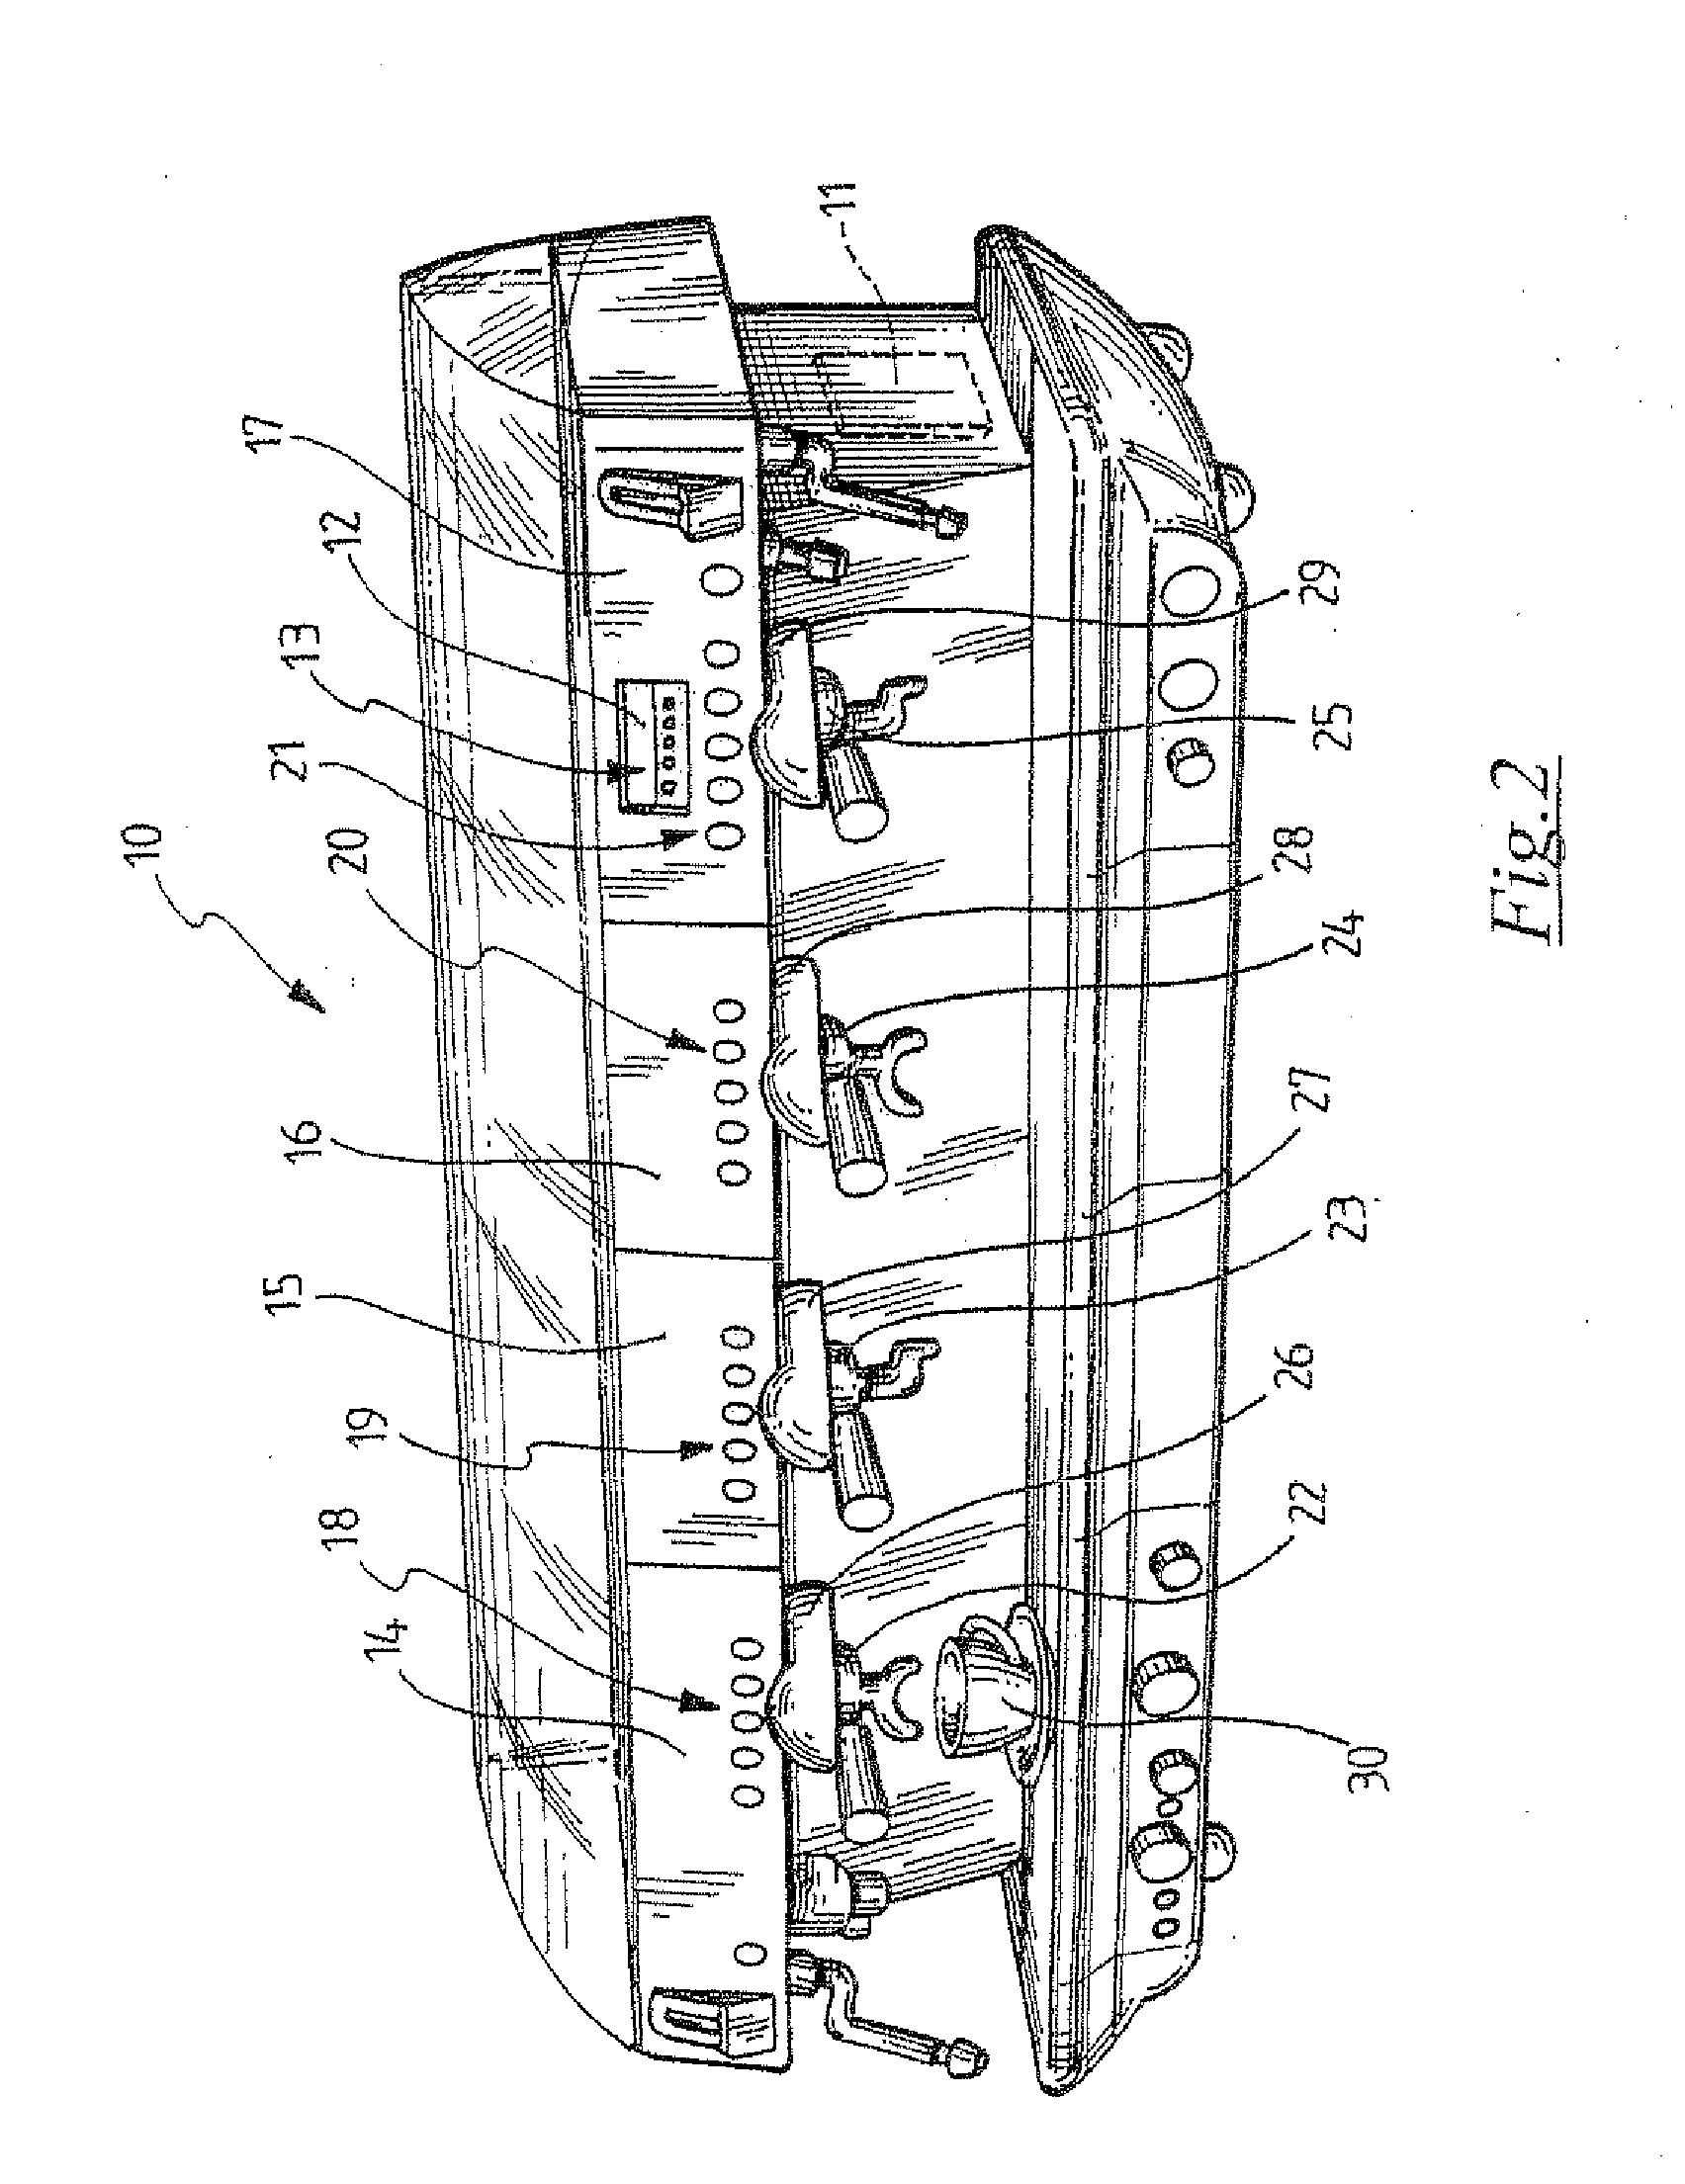 Apparatus and a method for refilling the filter-holders of an espresso coffee machine with selected doses of ground coffee to order